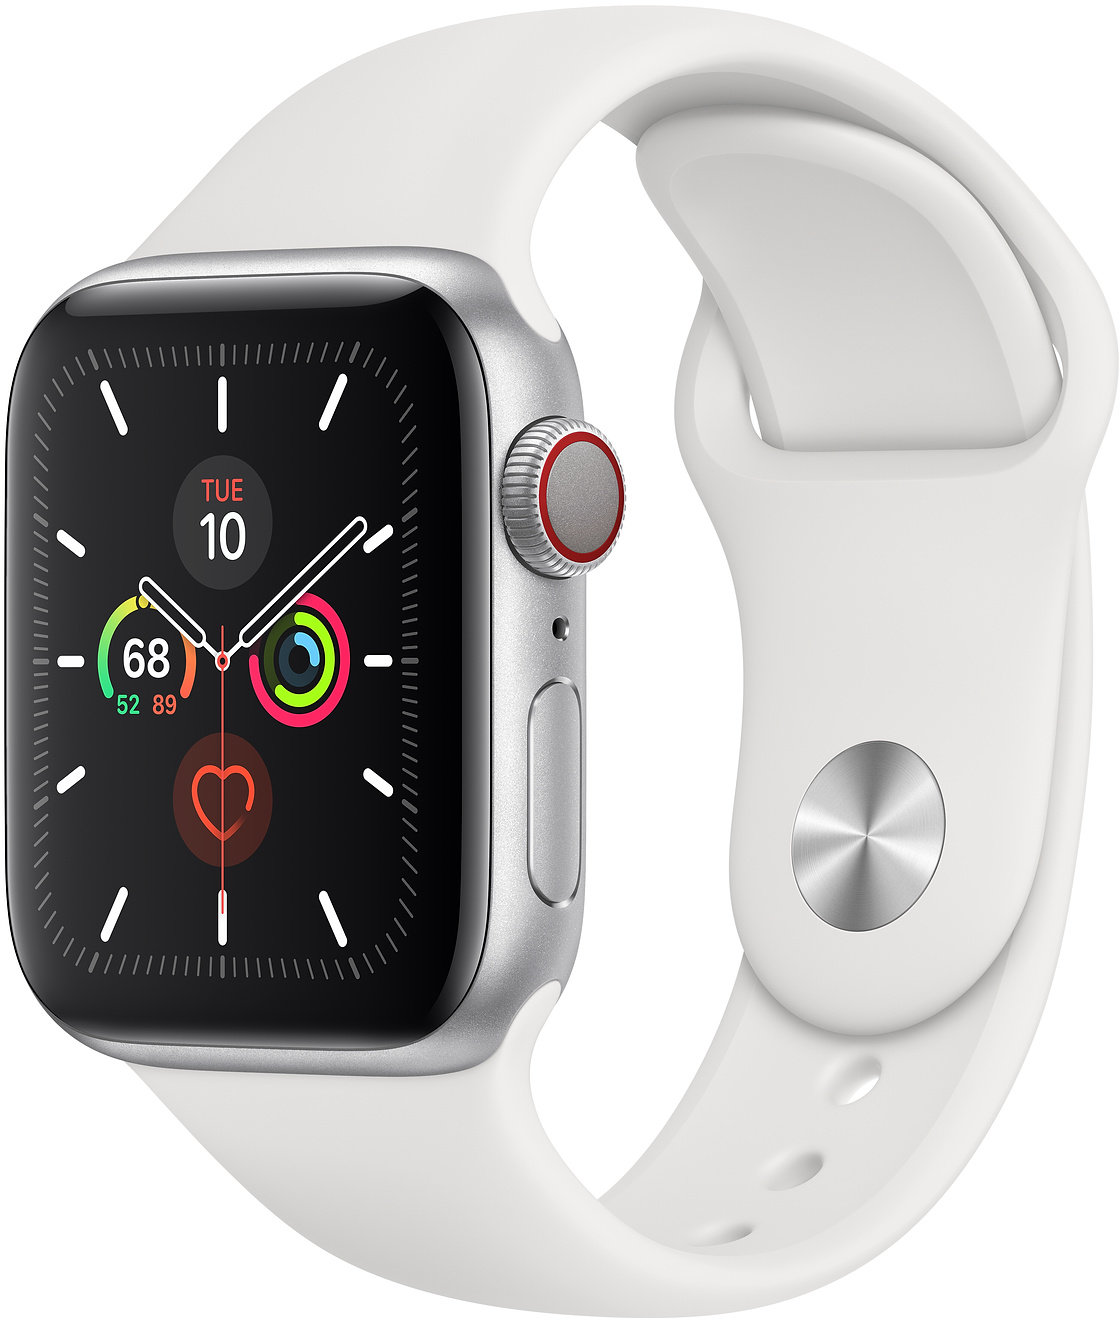 Акция на Apple Watch Series 5 40mm GPS+LTE Silver Aluminum Case with White Sport Band (MWWN2) от Stylus